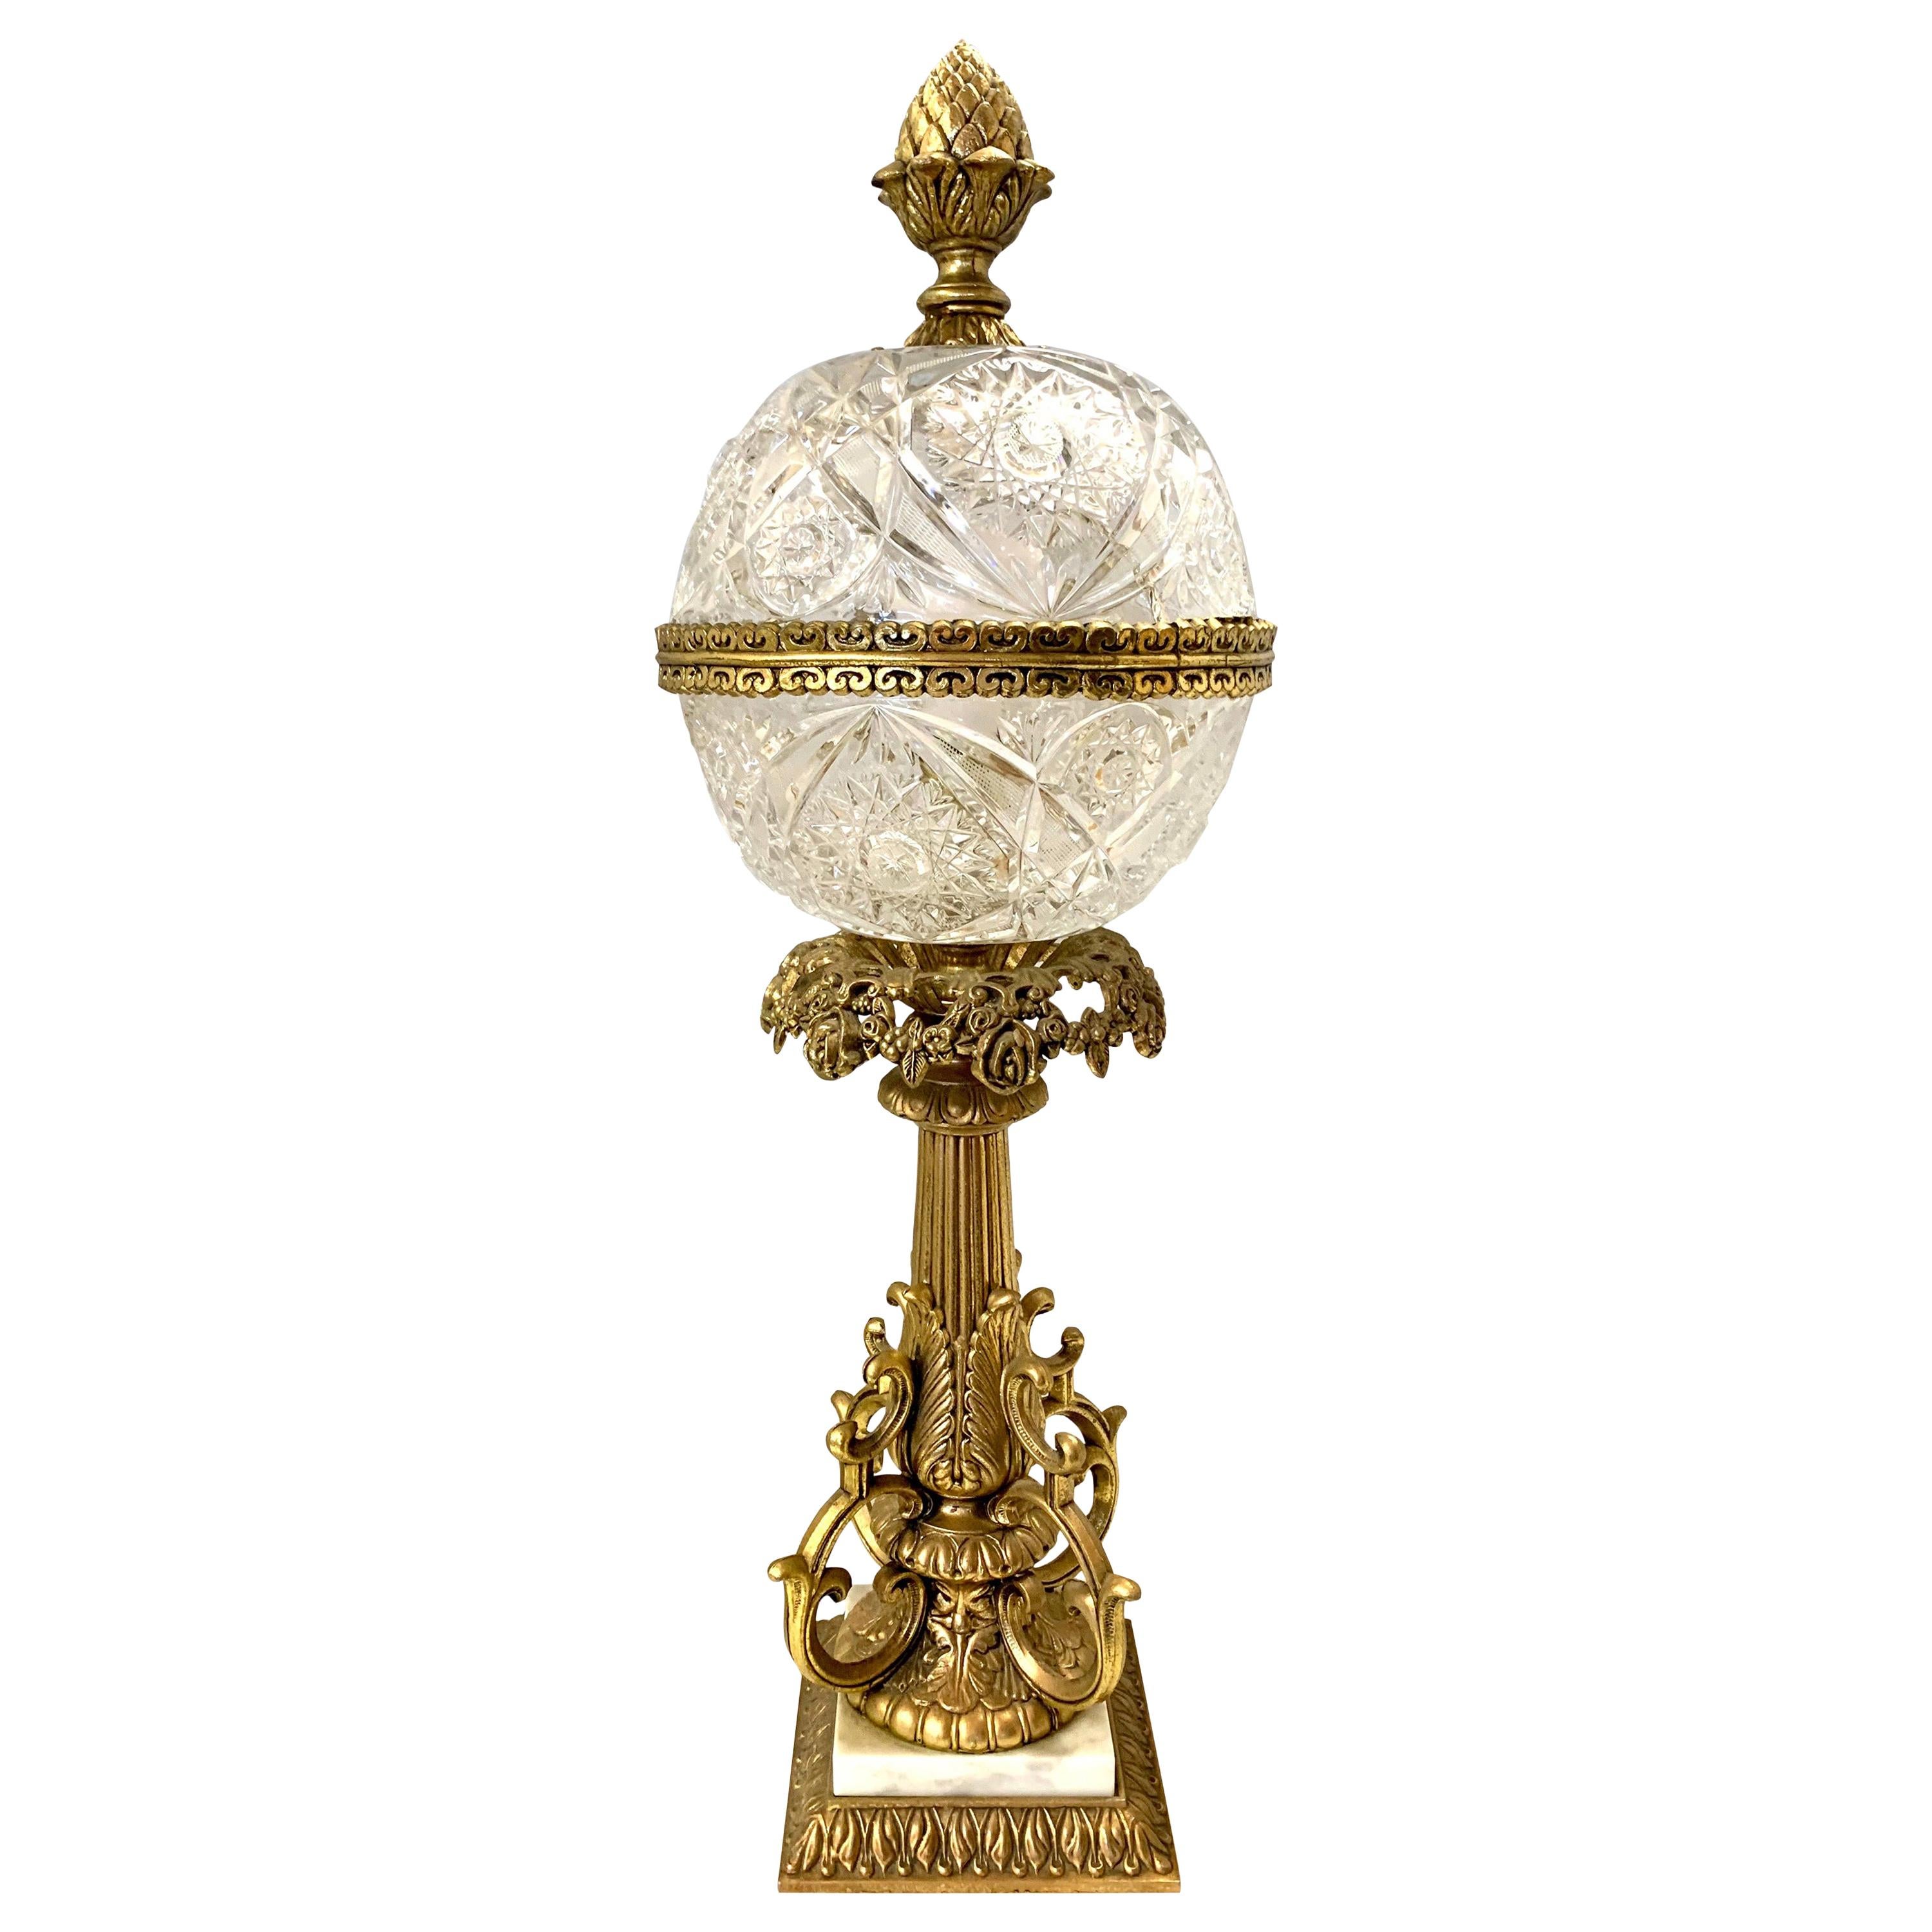 Tall Cut Crystal Ball and Cast Bronze French Table Lamp in Manner of Baccarat